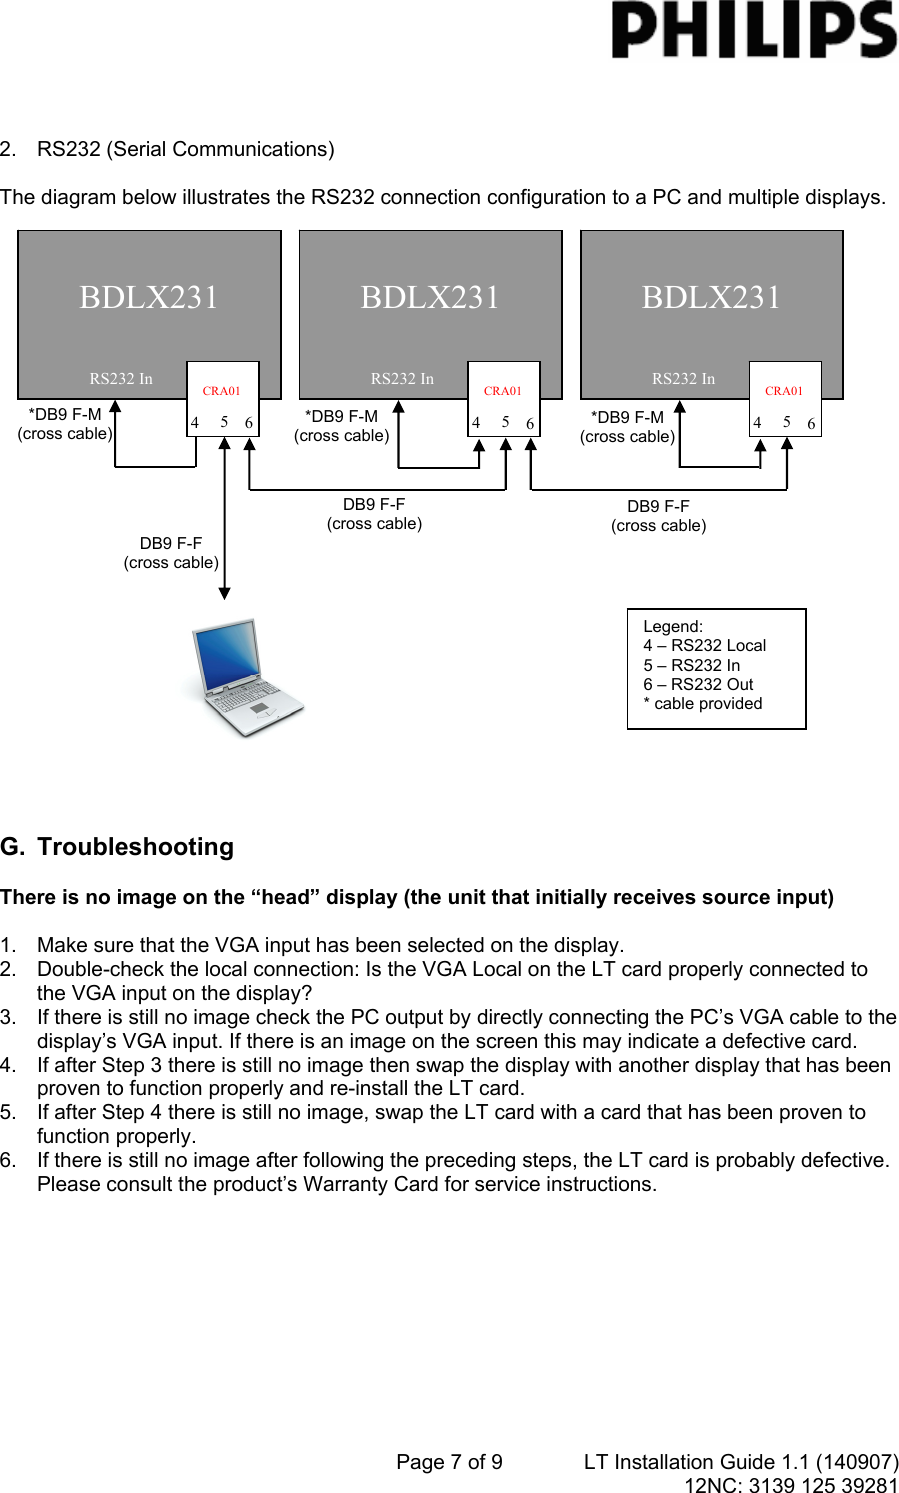 Page 7 of 9 - Philips Philips-Cra01-00-Owner-S-Manual Installation Guide For NetX